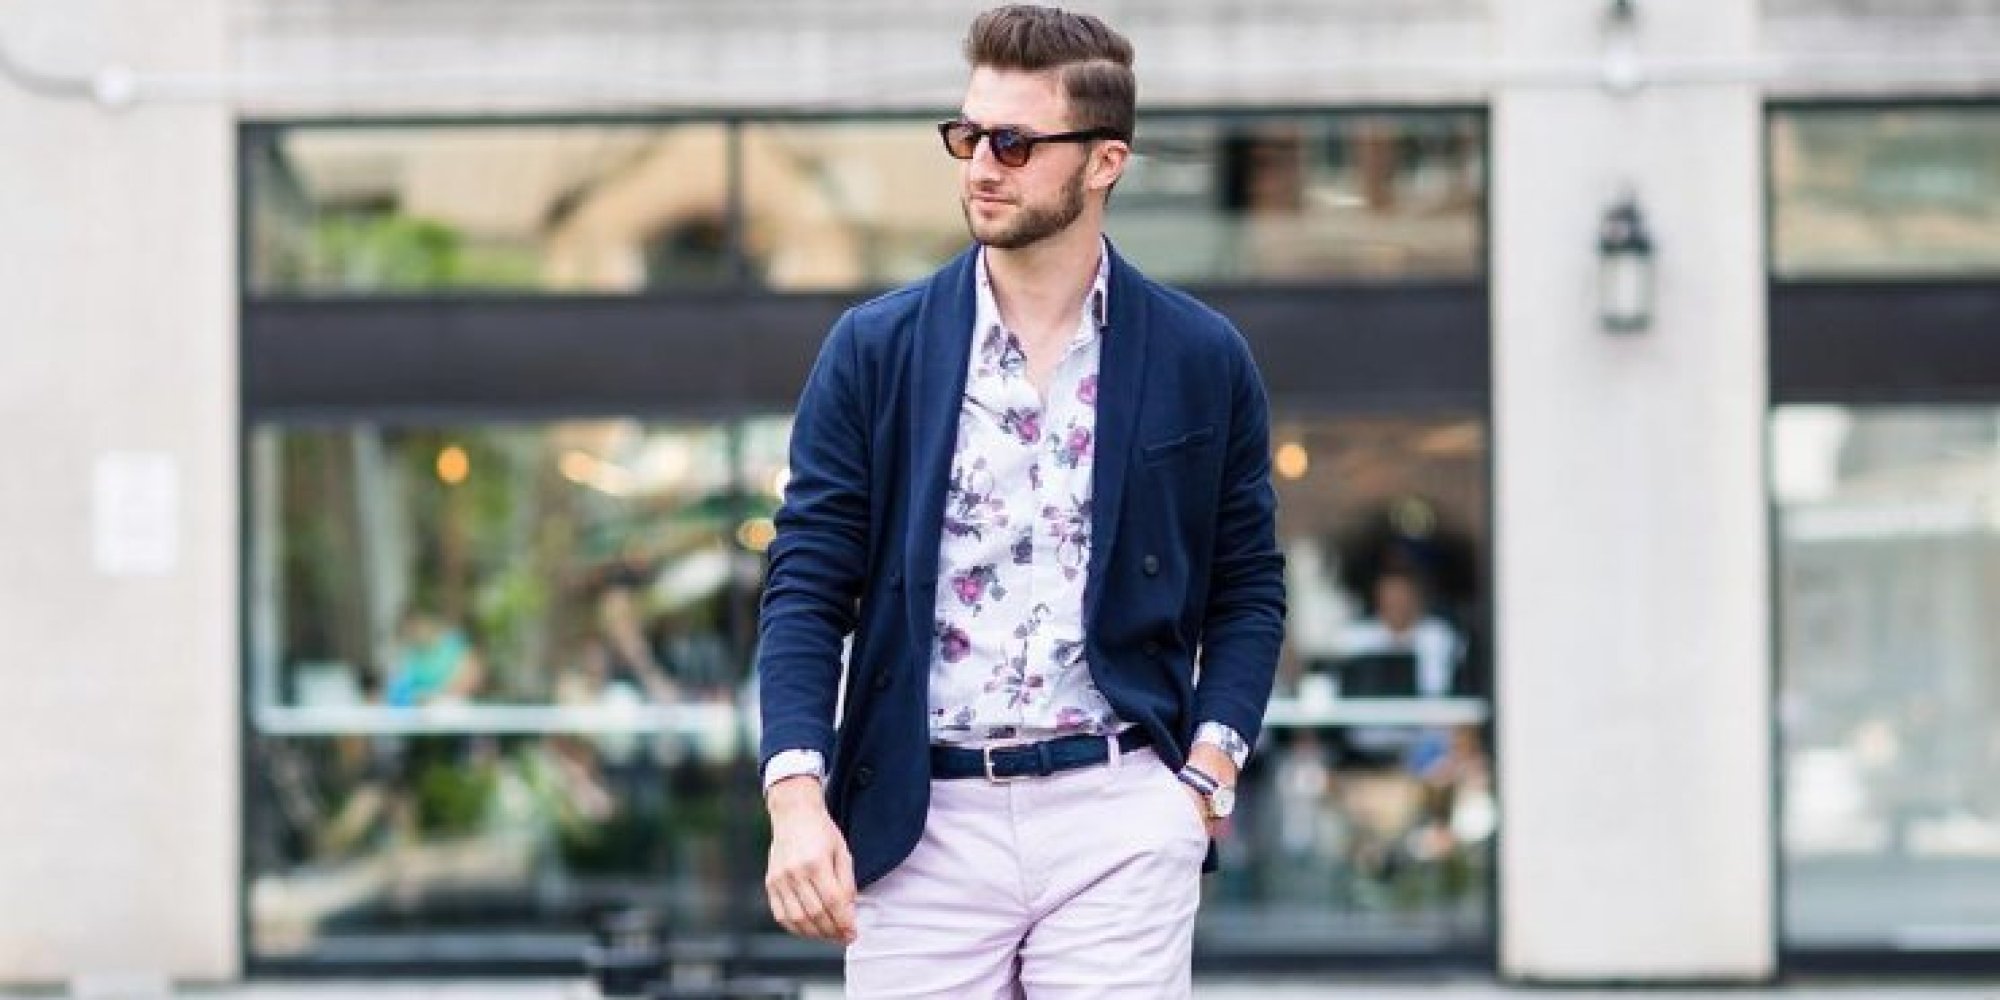 Outfit Ideas For Men